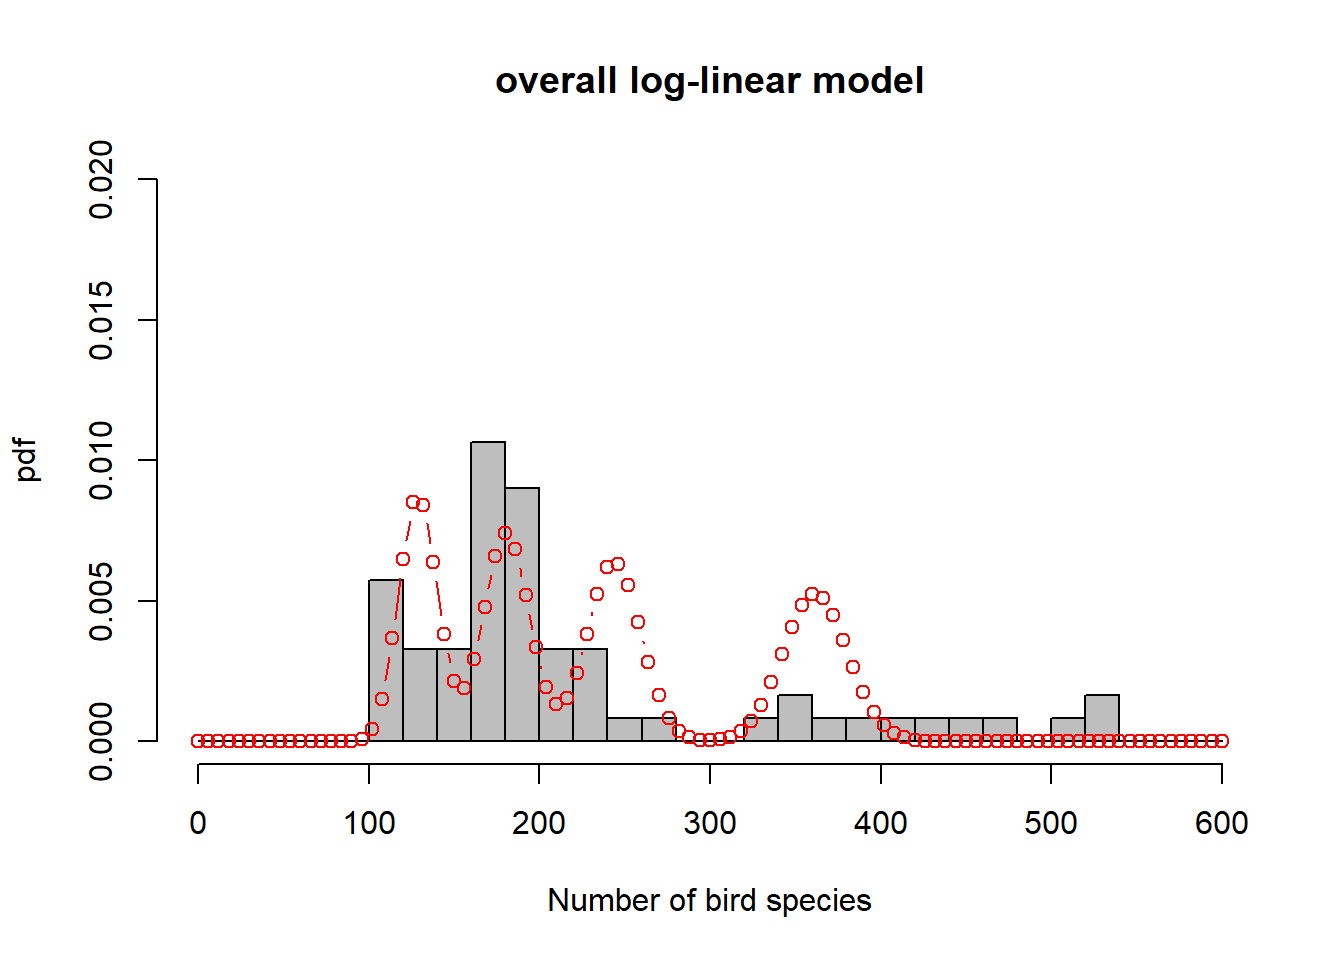 Illustration of log-linear regression with the birds example. (a) One overall Poisson distribution fitted to the data; equivalent to log-linear regression with an intercept only. This clearly does not capture the variation in the data. (b)-(e) Individual Poisson distributions for the four relief levels (compare Figure \@ref(fig:loglin)) as estimated by log-linear regression with relief as predictor. (f) Overall distribution estimated by the log-linear model, obtained by averaging the four individual distributions. This is clearly better at capturing the variation in the data, the predictor "relief" explains some of that variation, but the model is still underestimating the increase in variance with increasing mean response, e.g. (d)-(e). The data are _over-dispersed_ with respect to the Poisson process (see Chapter \@ref(overdisp)).